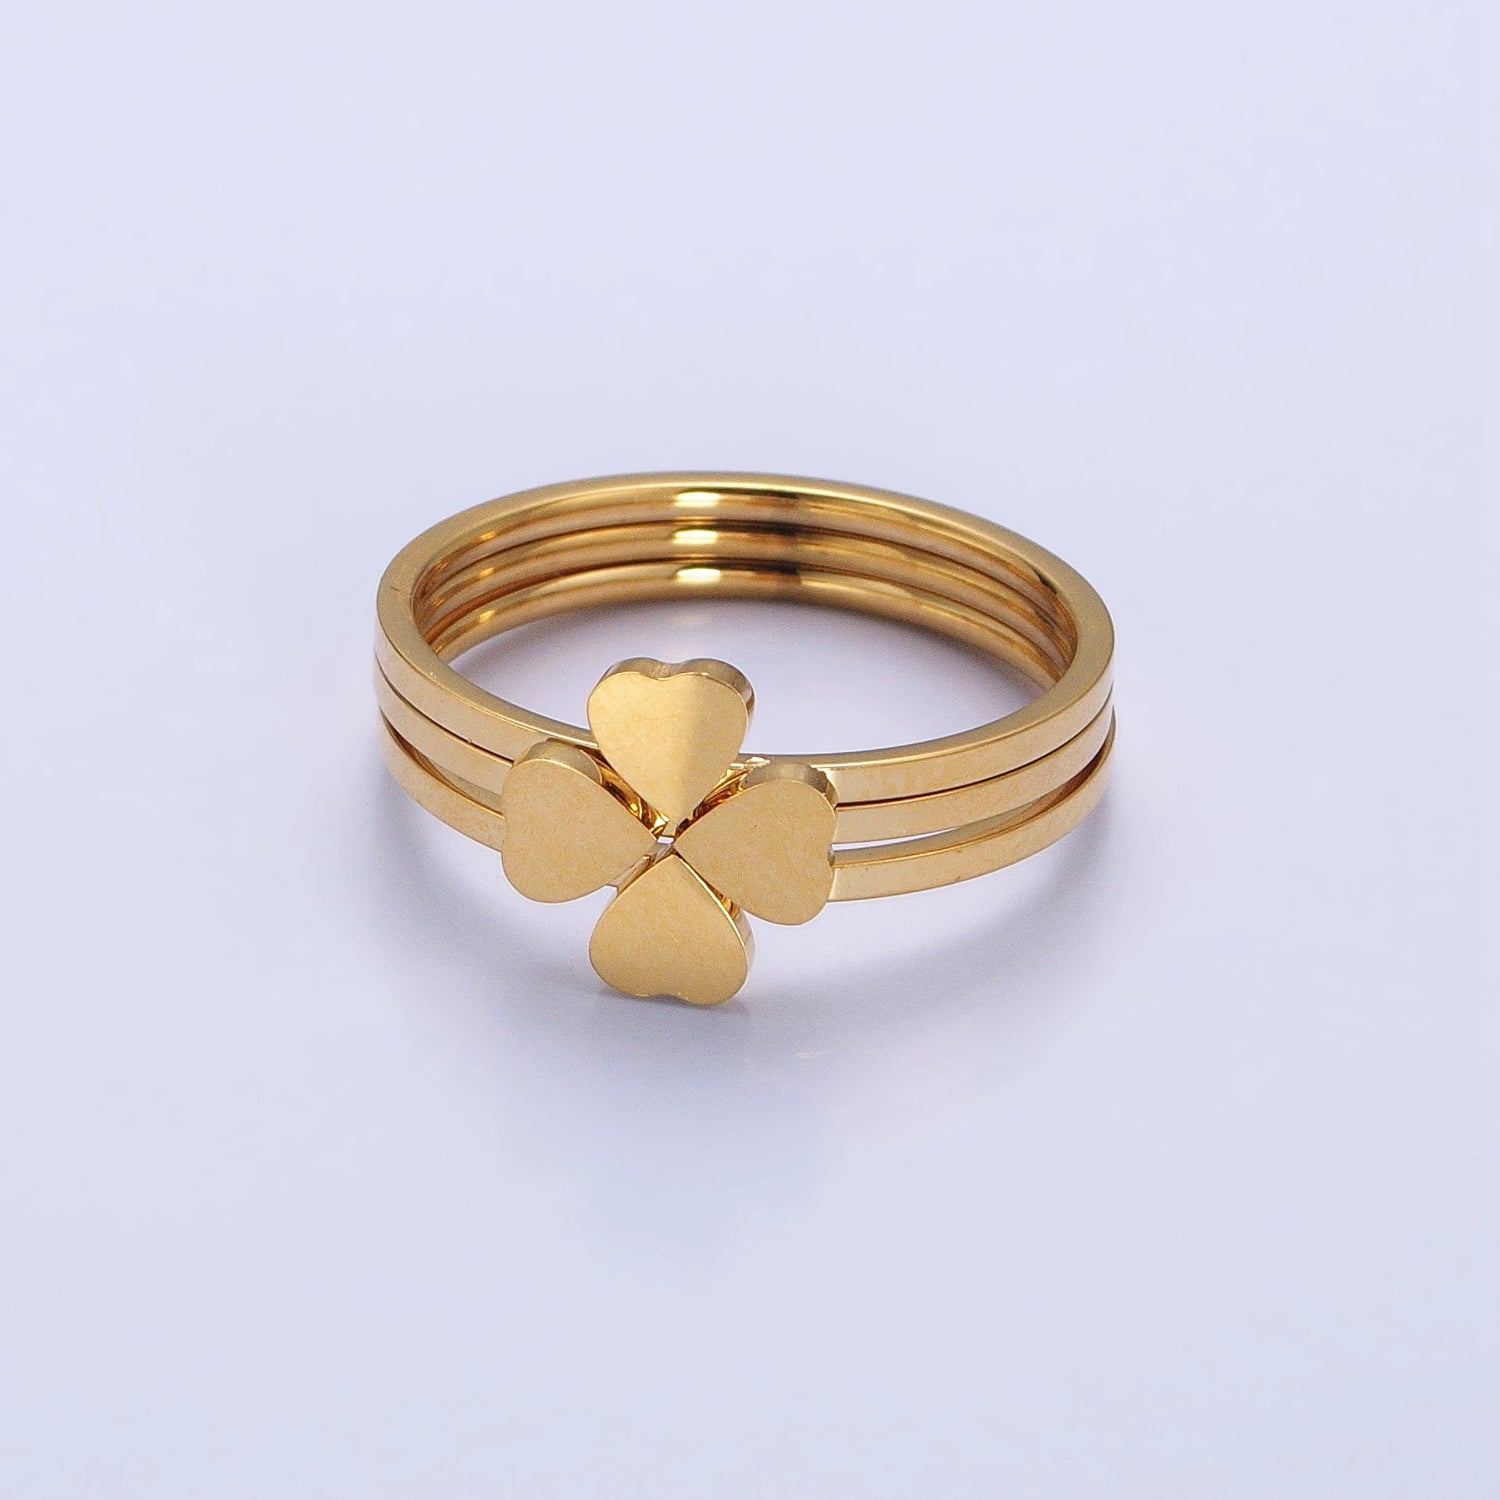 Stainless Steel Triple Heart Clover Quatrefoil Band Ring Set in Gold & Silver | AA1549, AA1556